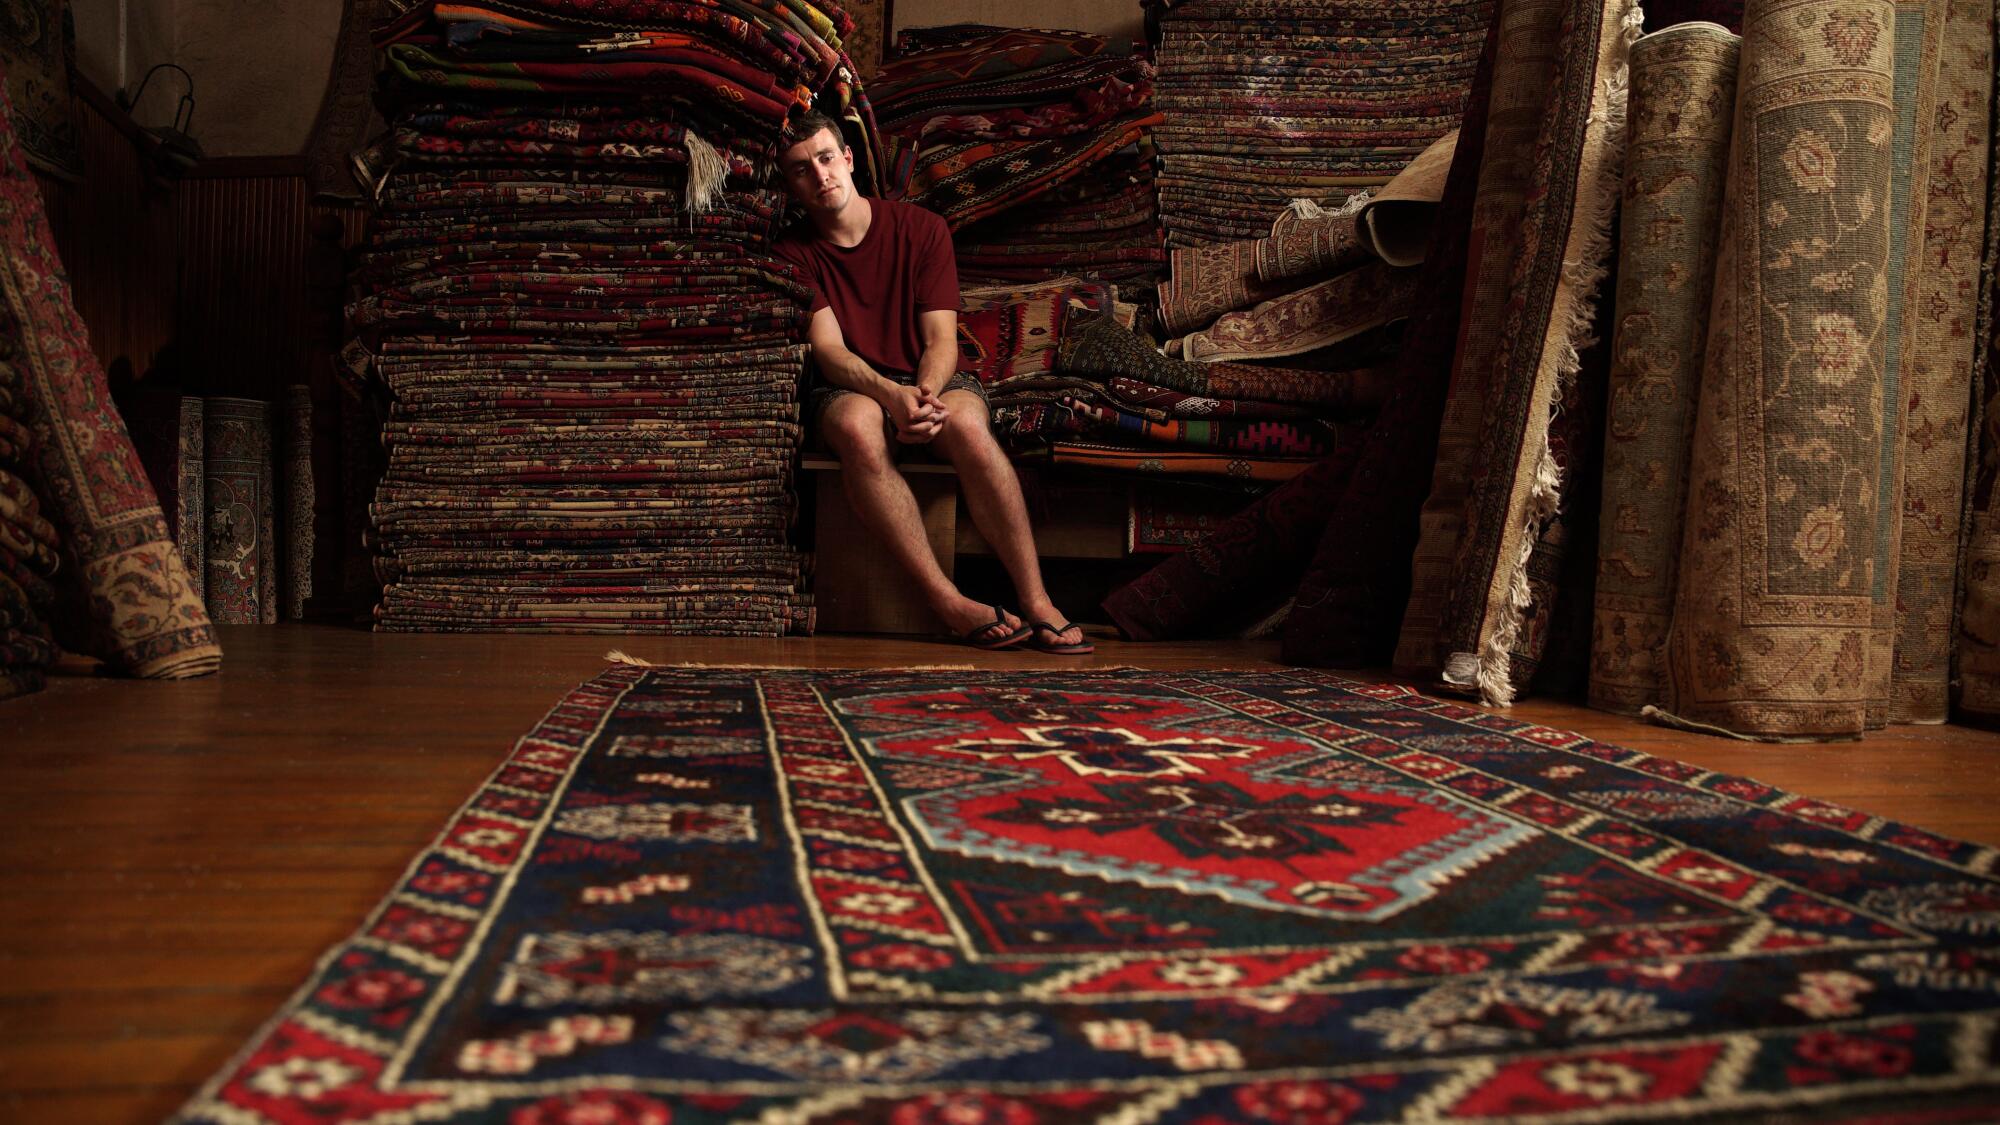 A man sits in a shop surrounded by rugs.